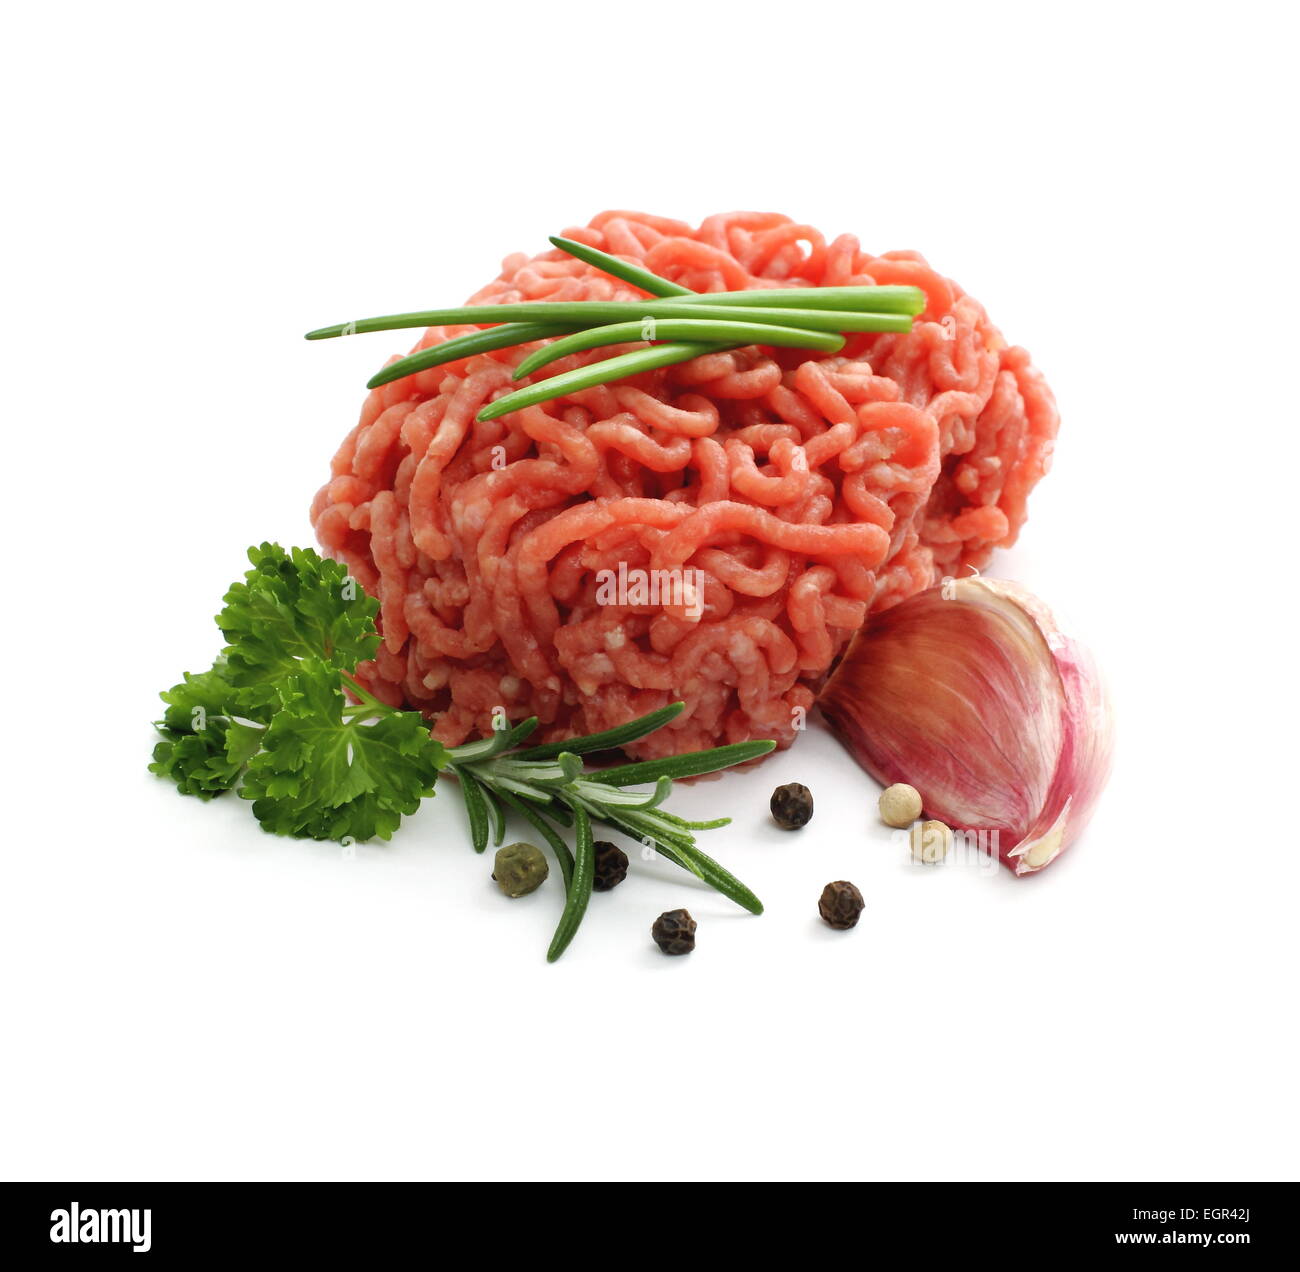 Minced meat ball with herbs, isolated Stock Photo